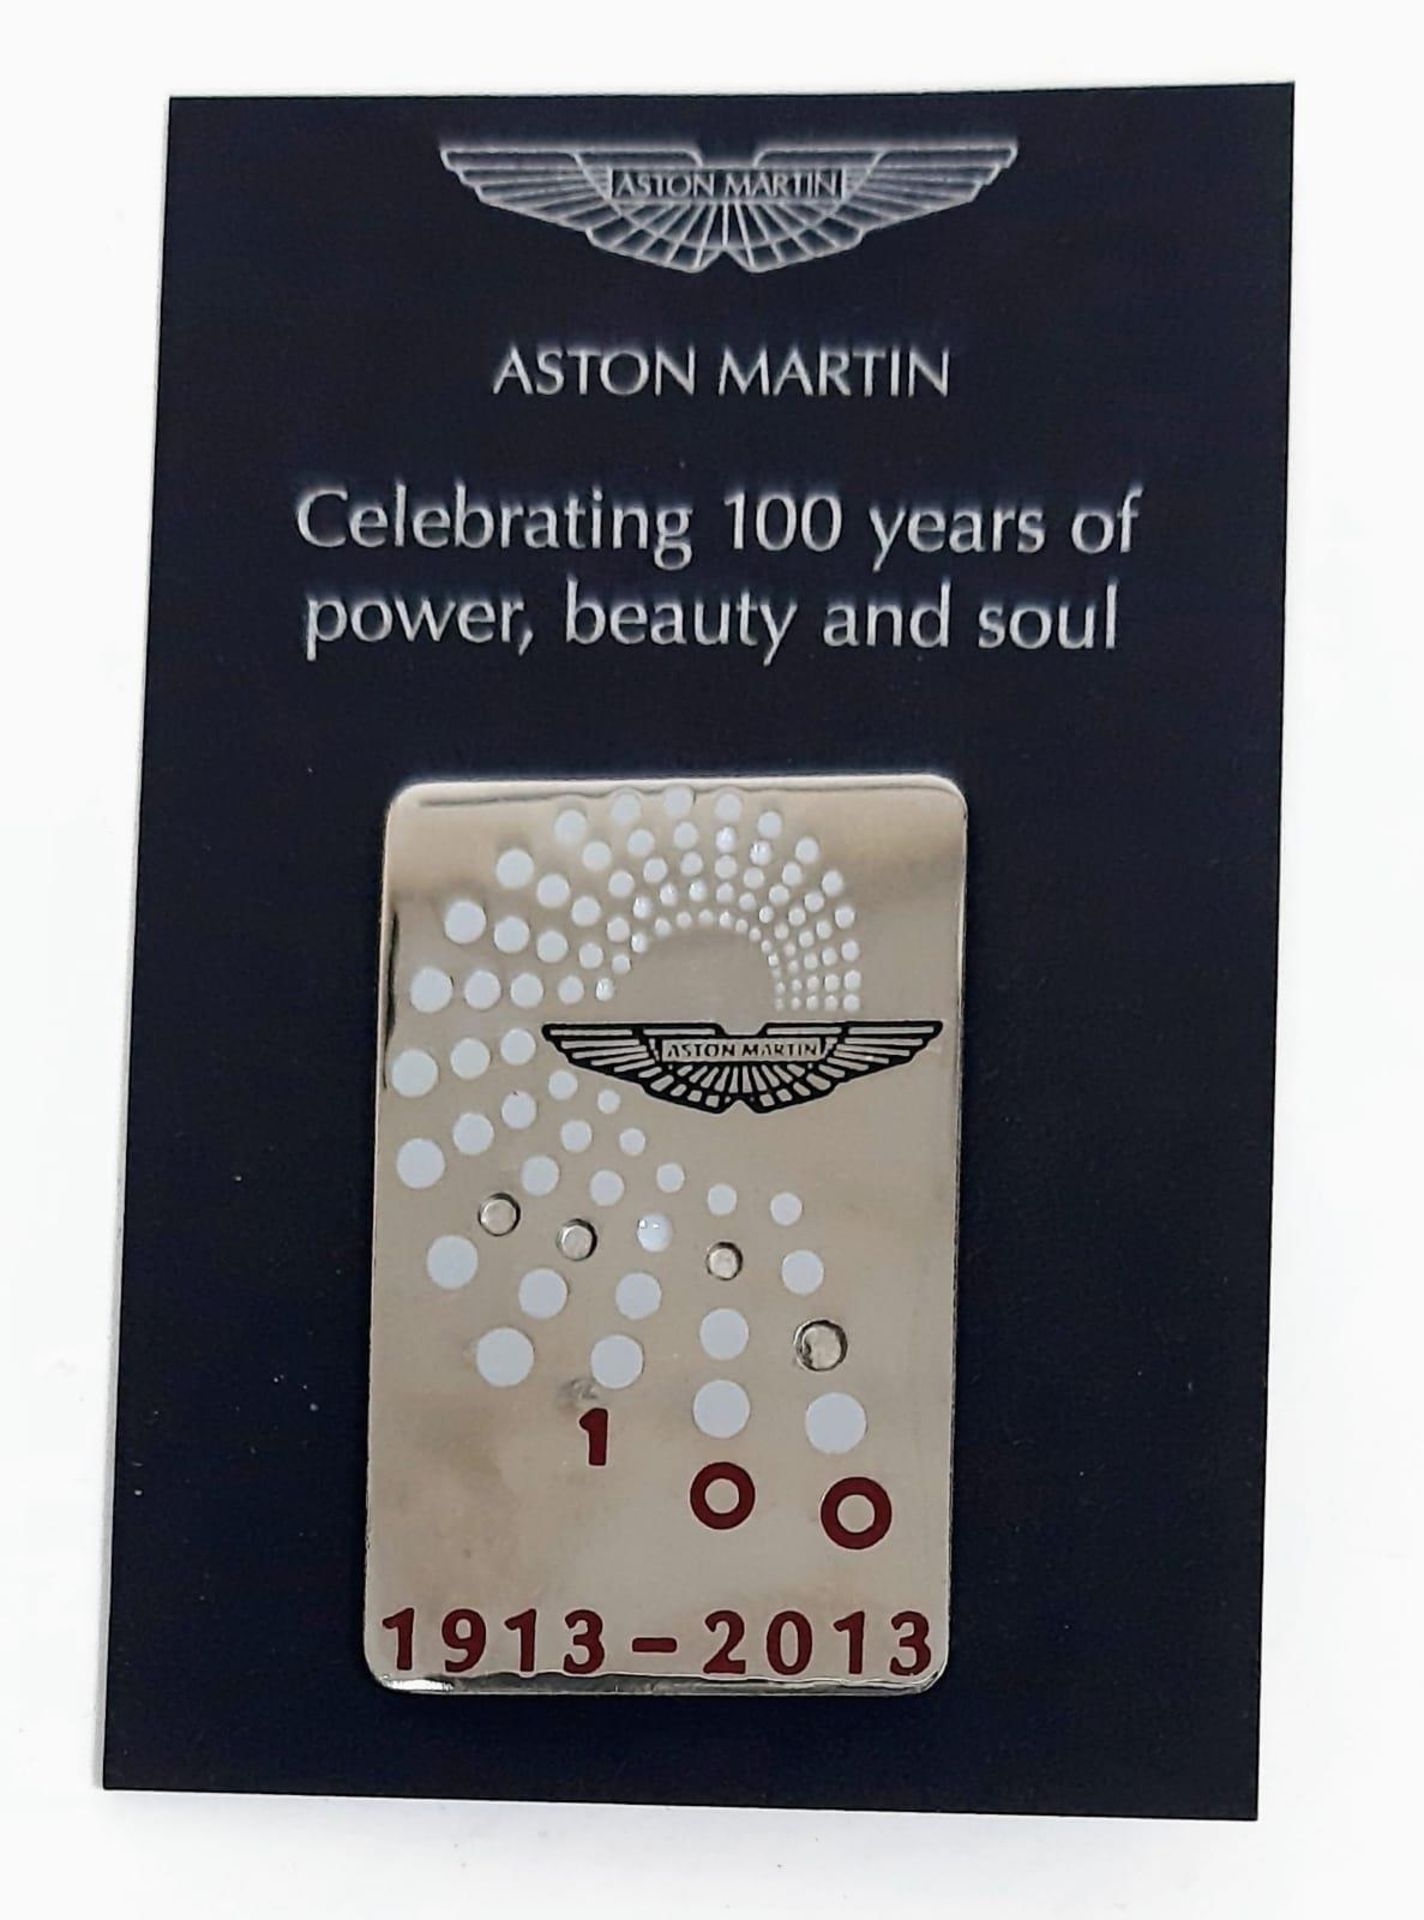 A celebration of 100th Anniversary of Aston Martin 1913-2013. Programme in immaculate condition - Image 2 of 4